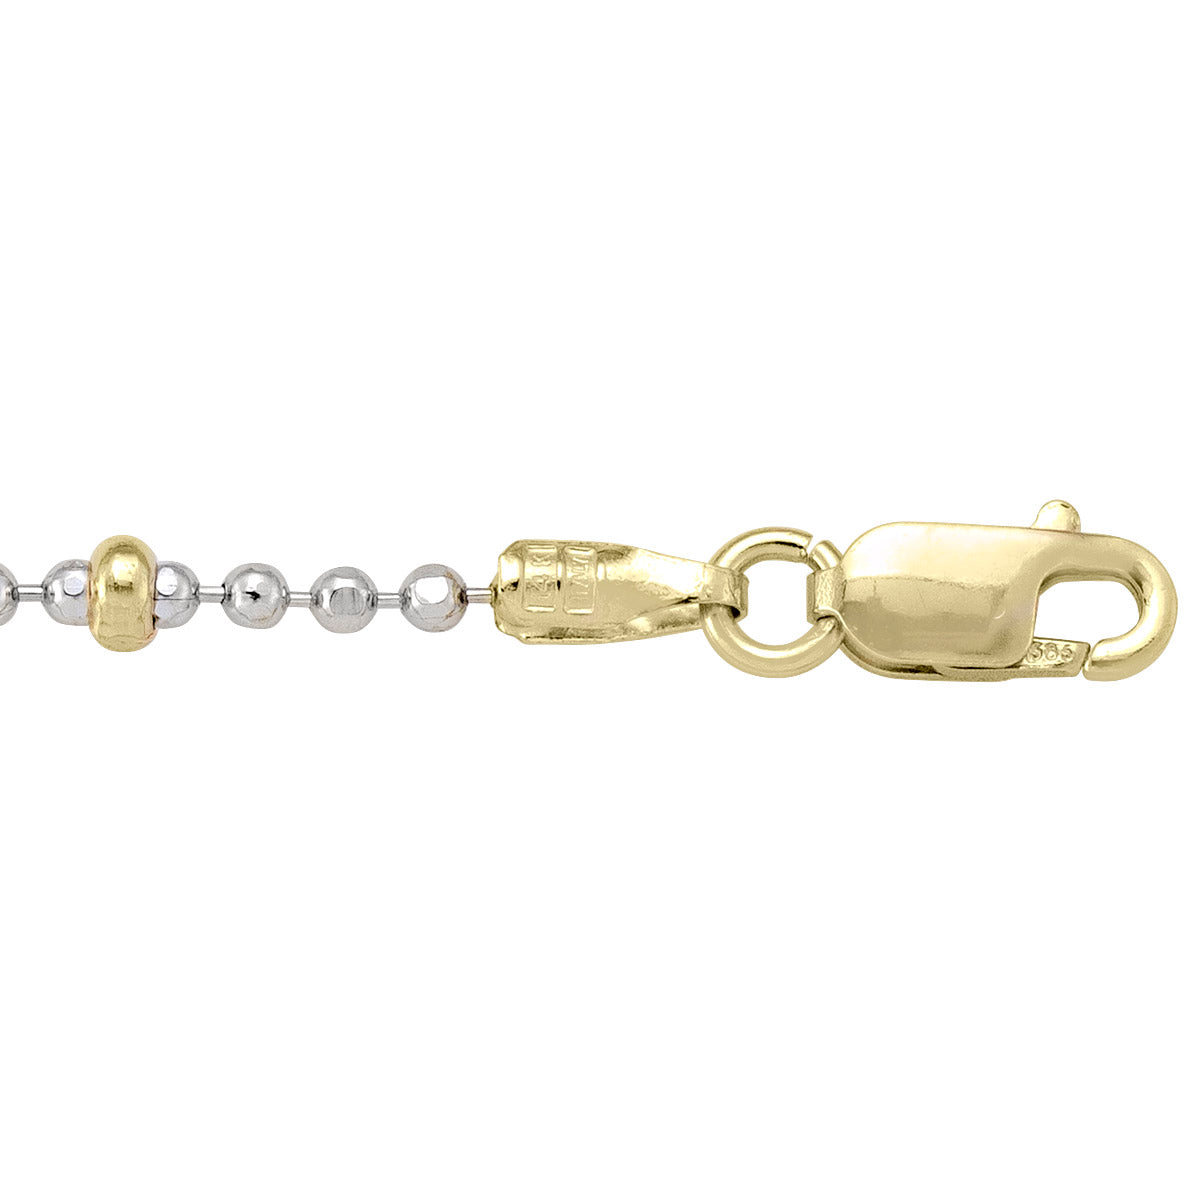 CHAINS TWO TONE GOLD STATION BEAD LINK 